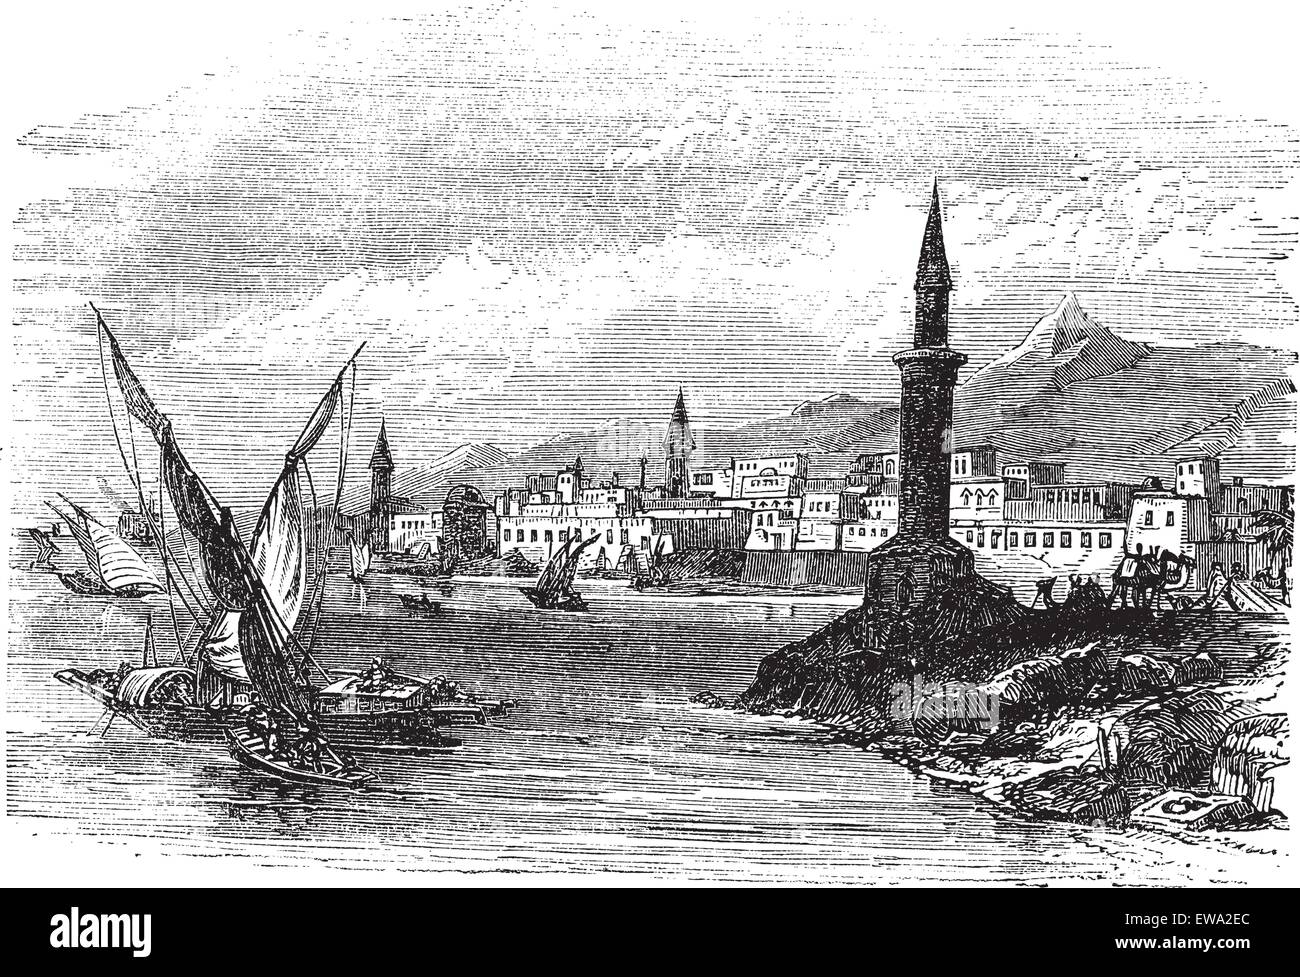 Jeddah or Jiddah or Jidda or Jedda in Saudi Arabia, during the 1890s, vintage engraving. Old engraved illustration of Jeddah with moving boats in front. Stock Vector